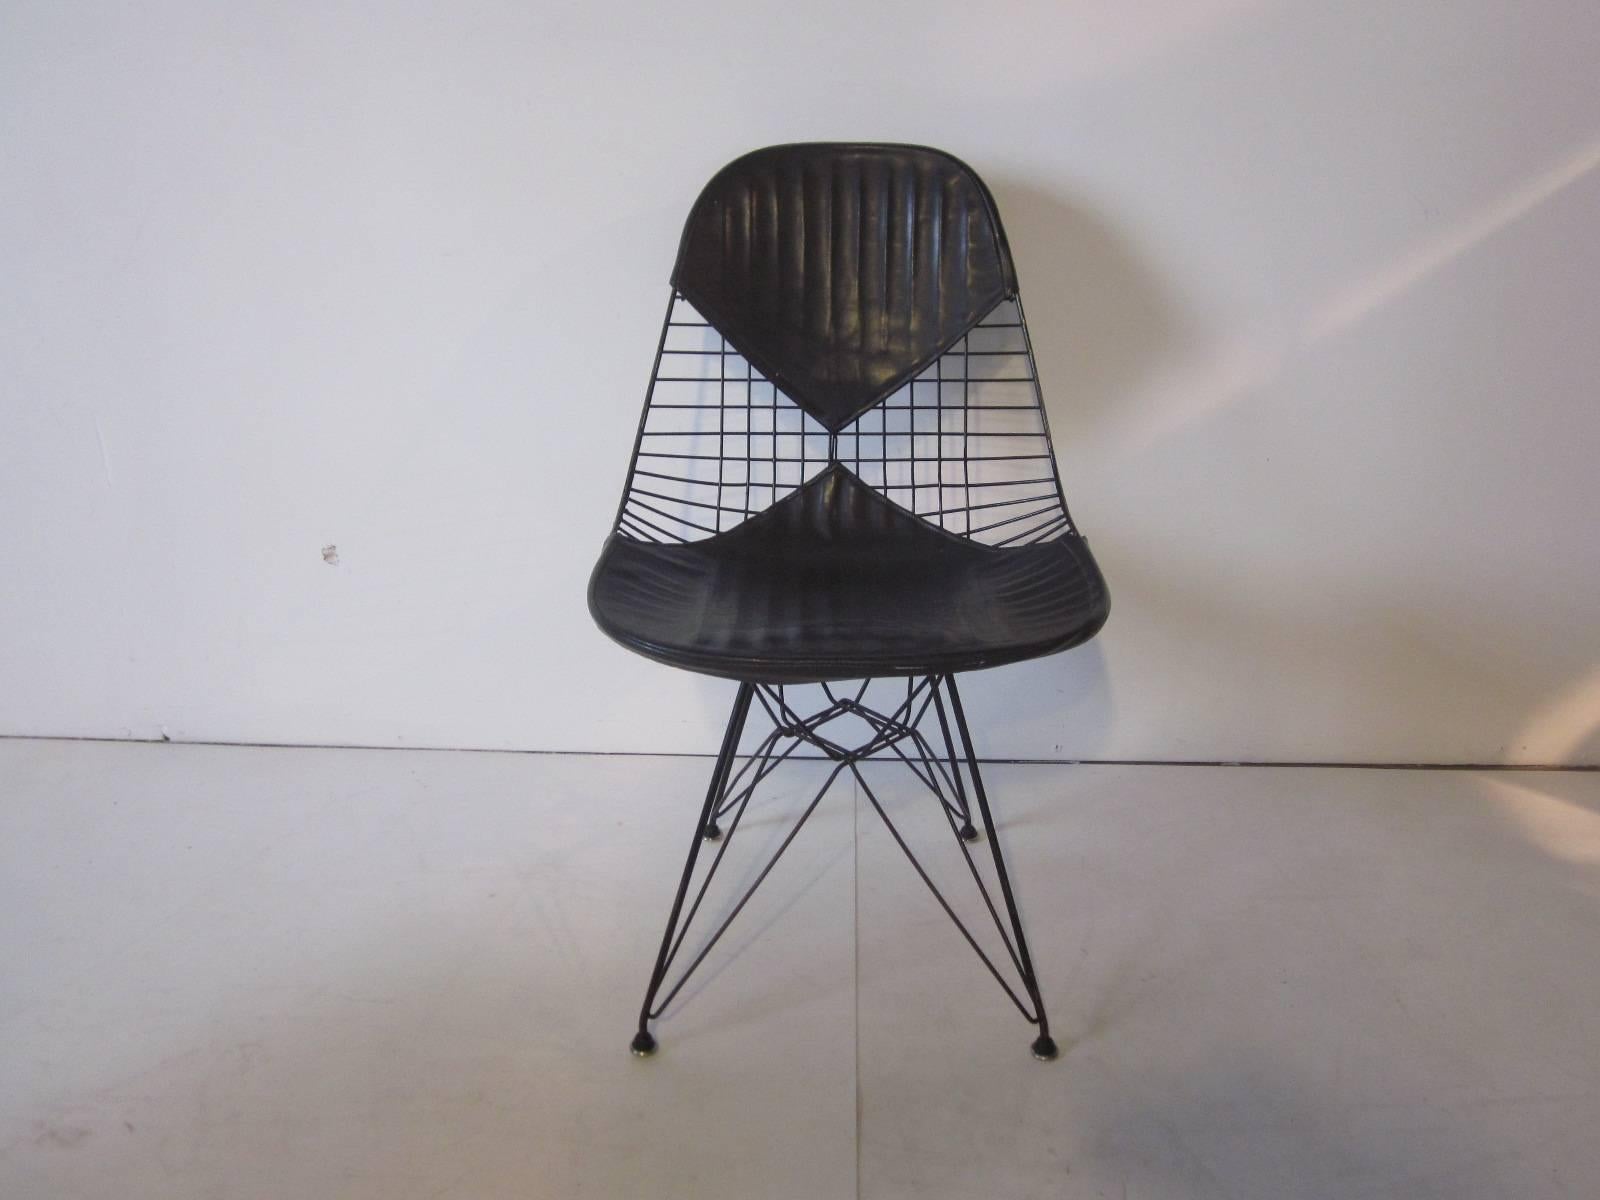 A pair of black metal wire Eiffel tower based chairs with bikini styled Naugahyde seat covers very early production chairs with the self leveling domed floor guides. Manufactured by the Herman Miller Furniture Company.